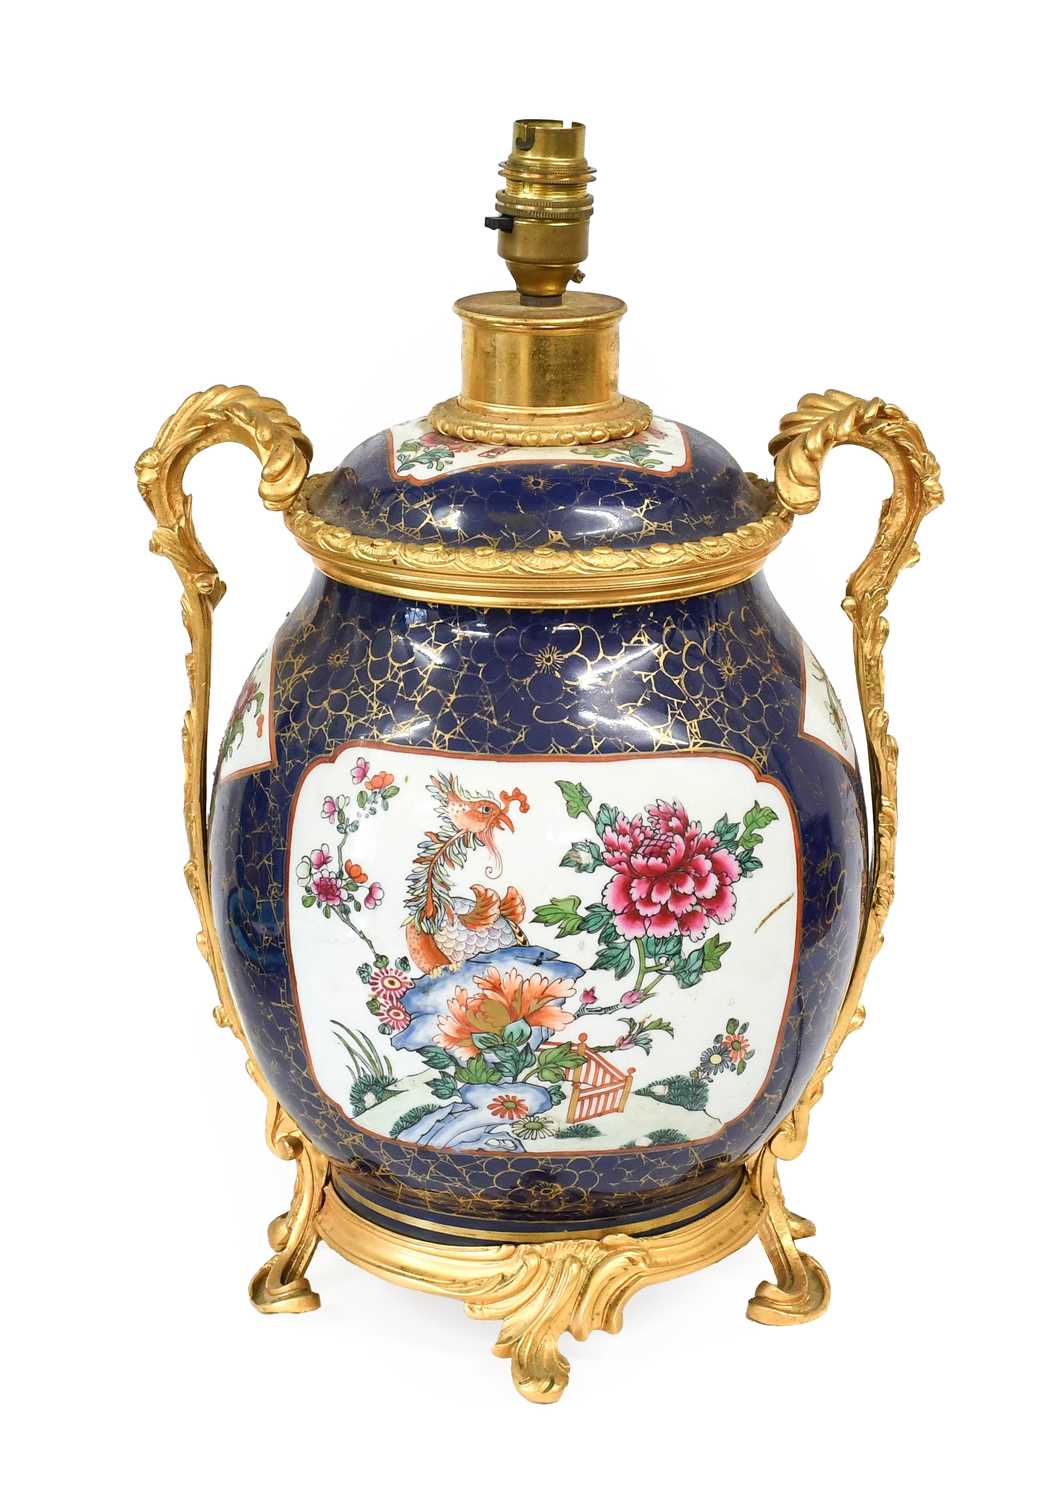 A Chinese Porcelain Ginger Jar and Cover, 18th century, with later gilt bronze mounts and now as a - Image 2 of 12